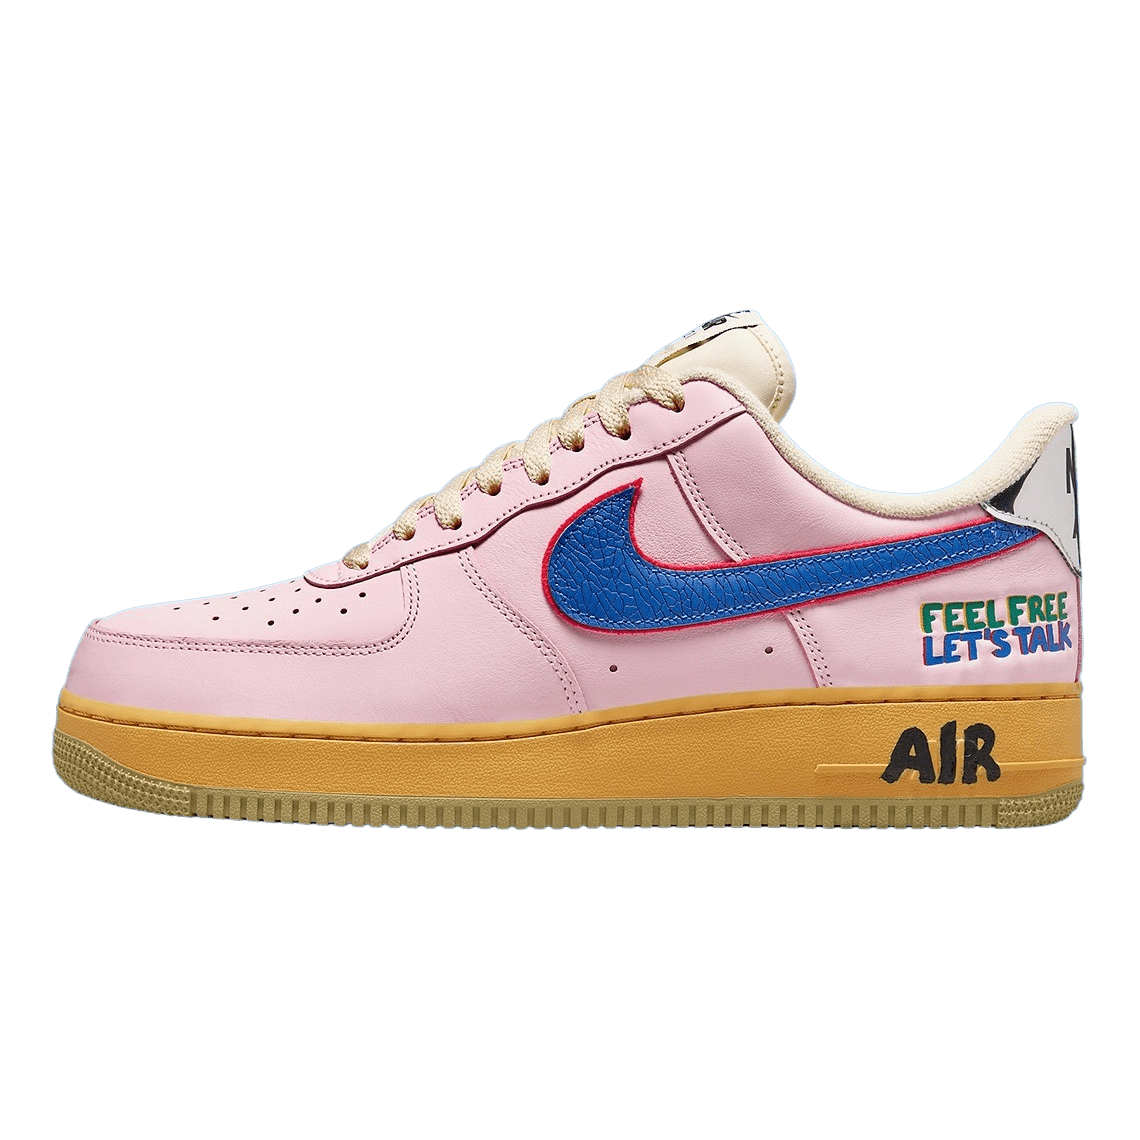 Nike Air Force 1 Low Feel Free Lets Talk DX2667 600 2